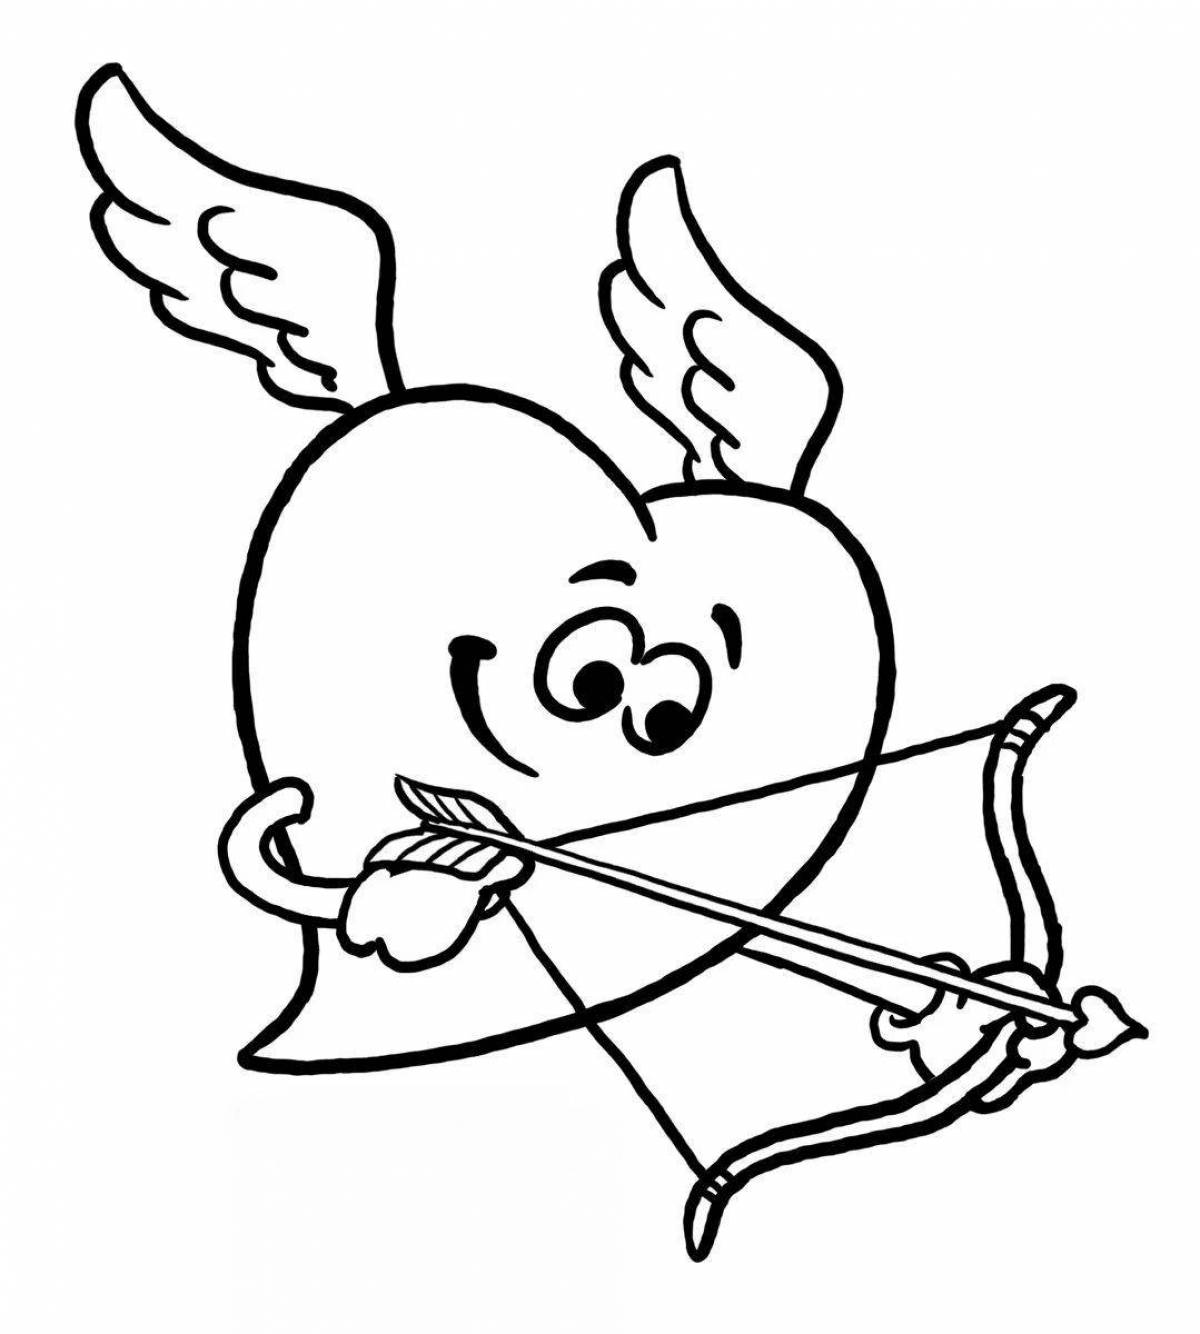 Charming cupid with heart coloring book